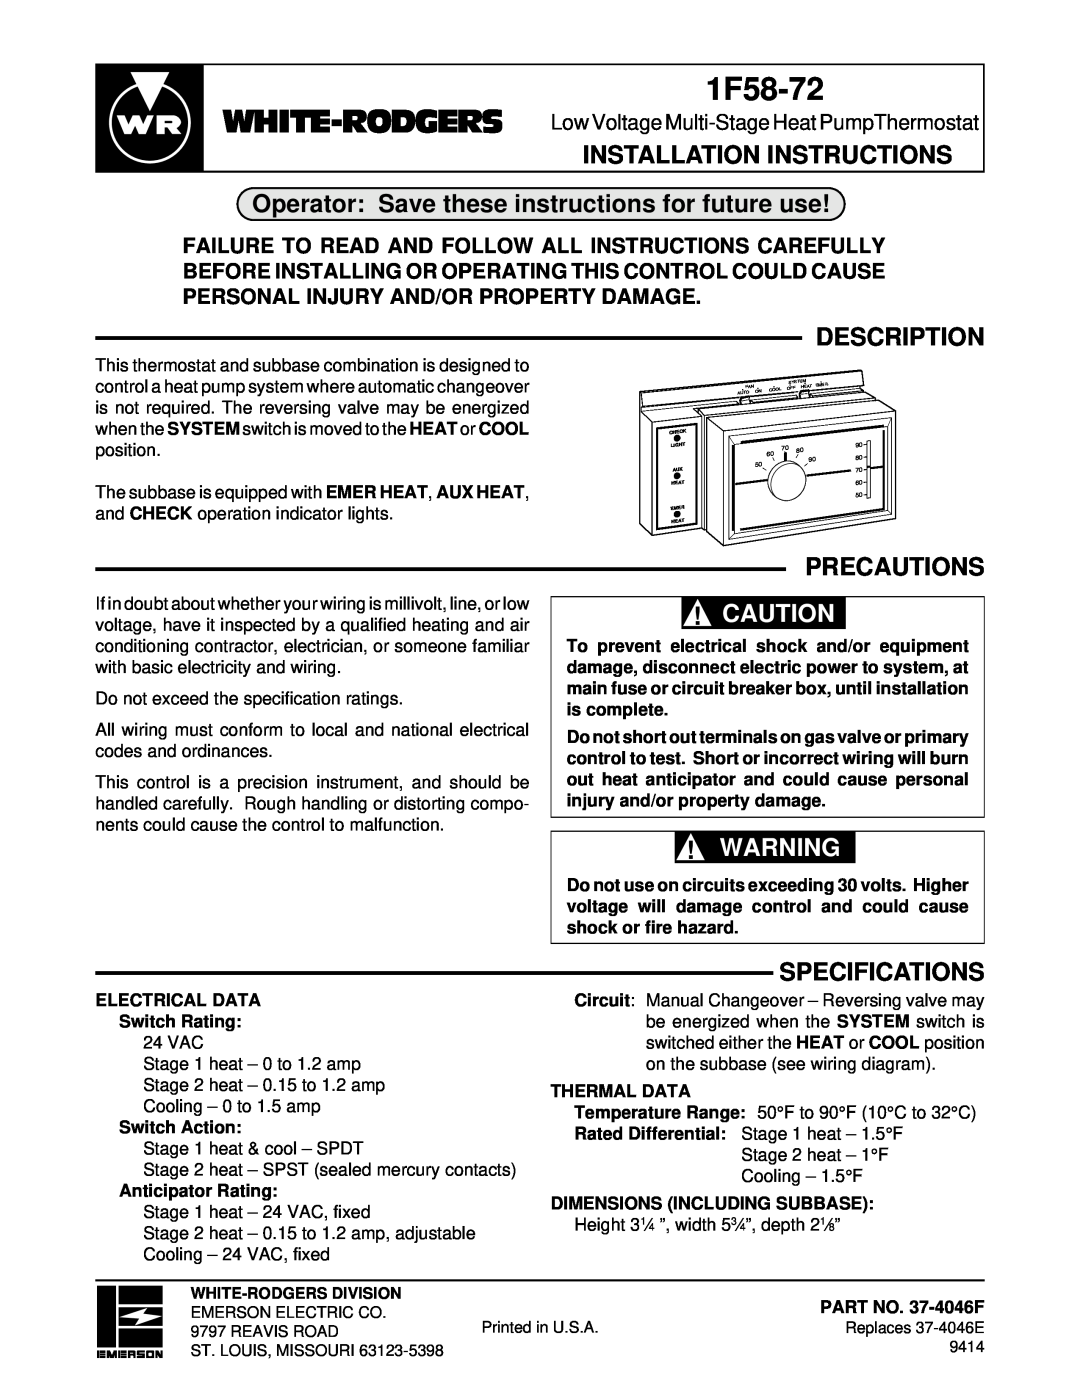 White Rodgers IF58-72 installation instructions Installation Instructions, Operator Save these instructions for future use 